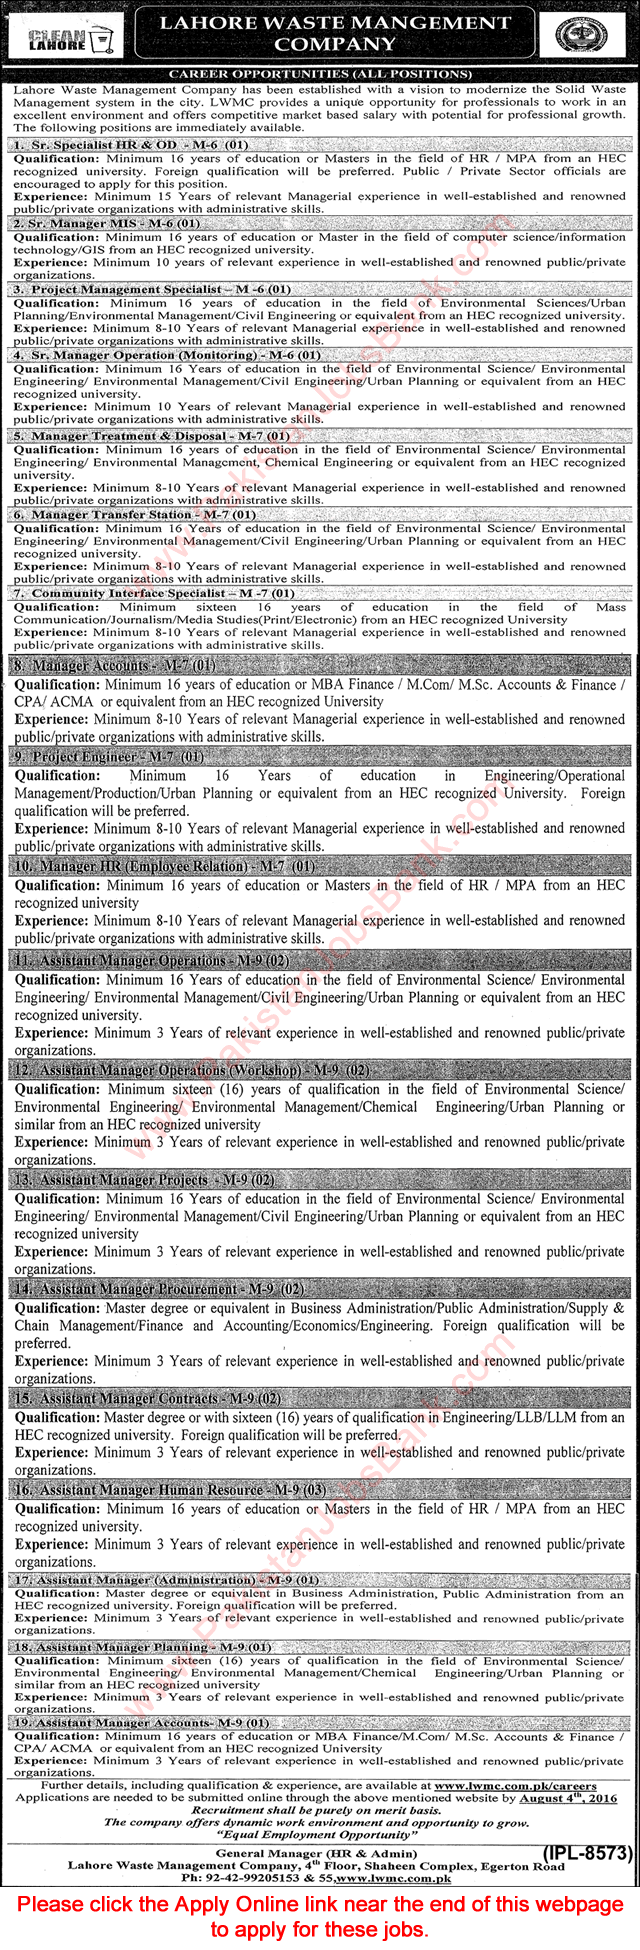 Lahore Waste Management Company Jobs July 2016 LWMC Apply Online Managers & Others Latest